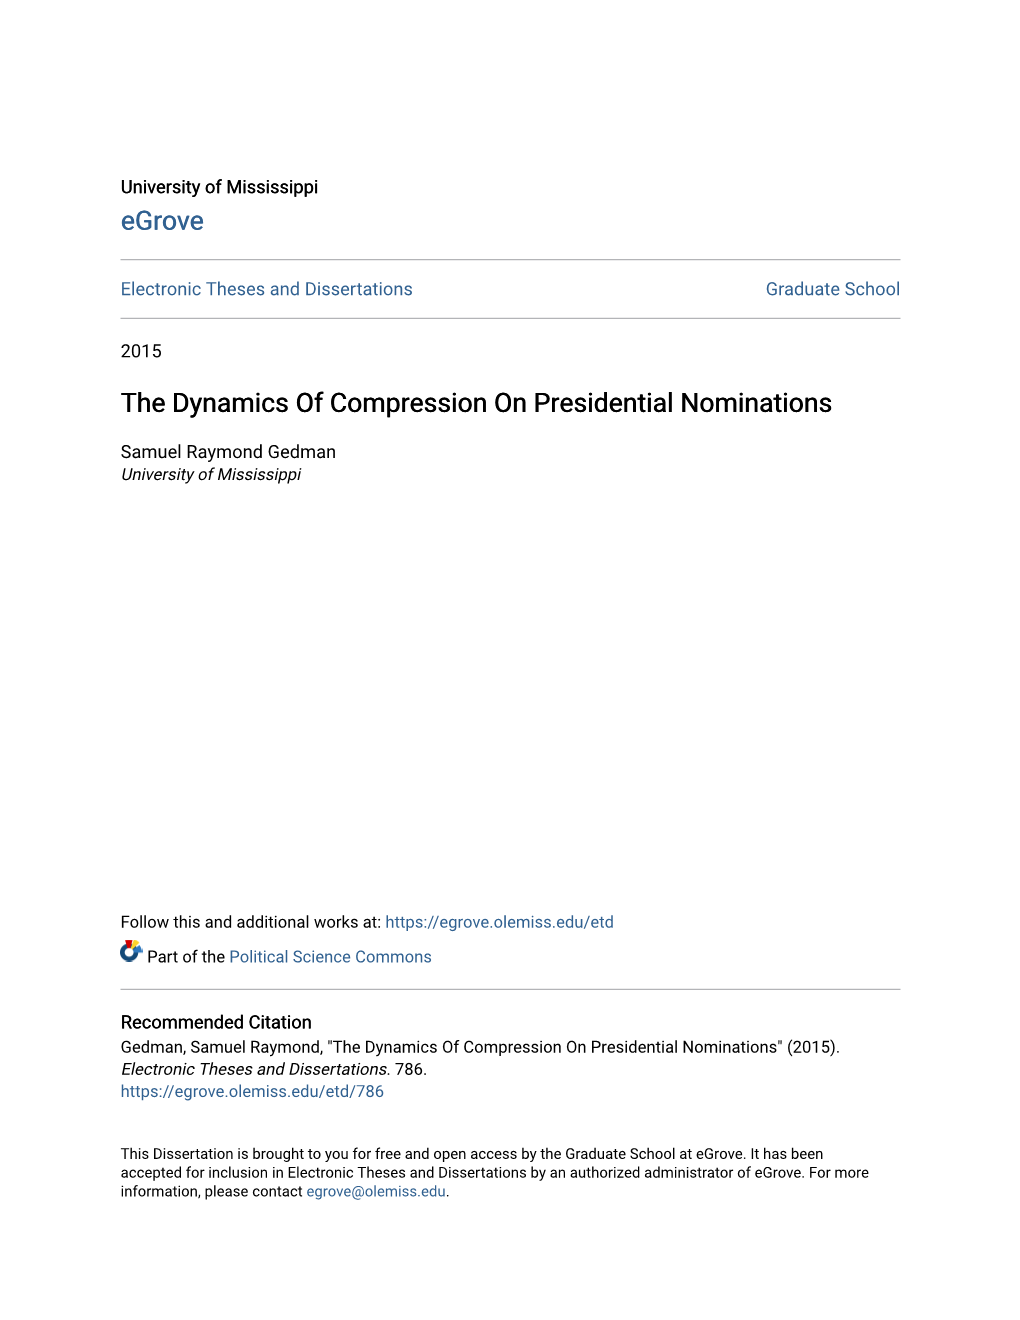 The Dynamics of Compression on Presidential Nominations